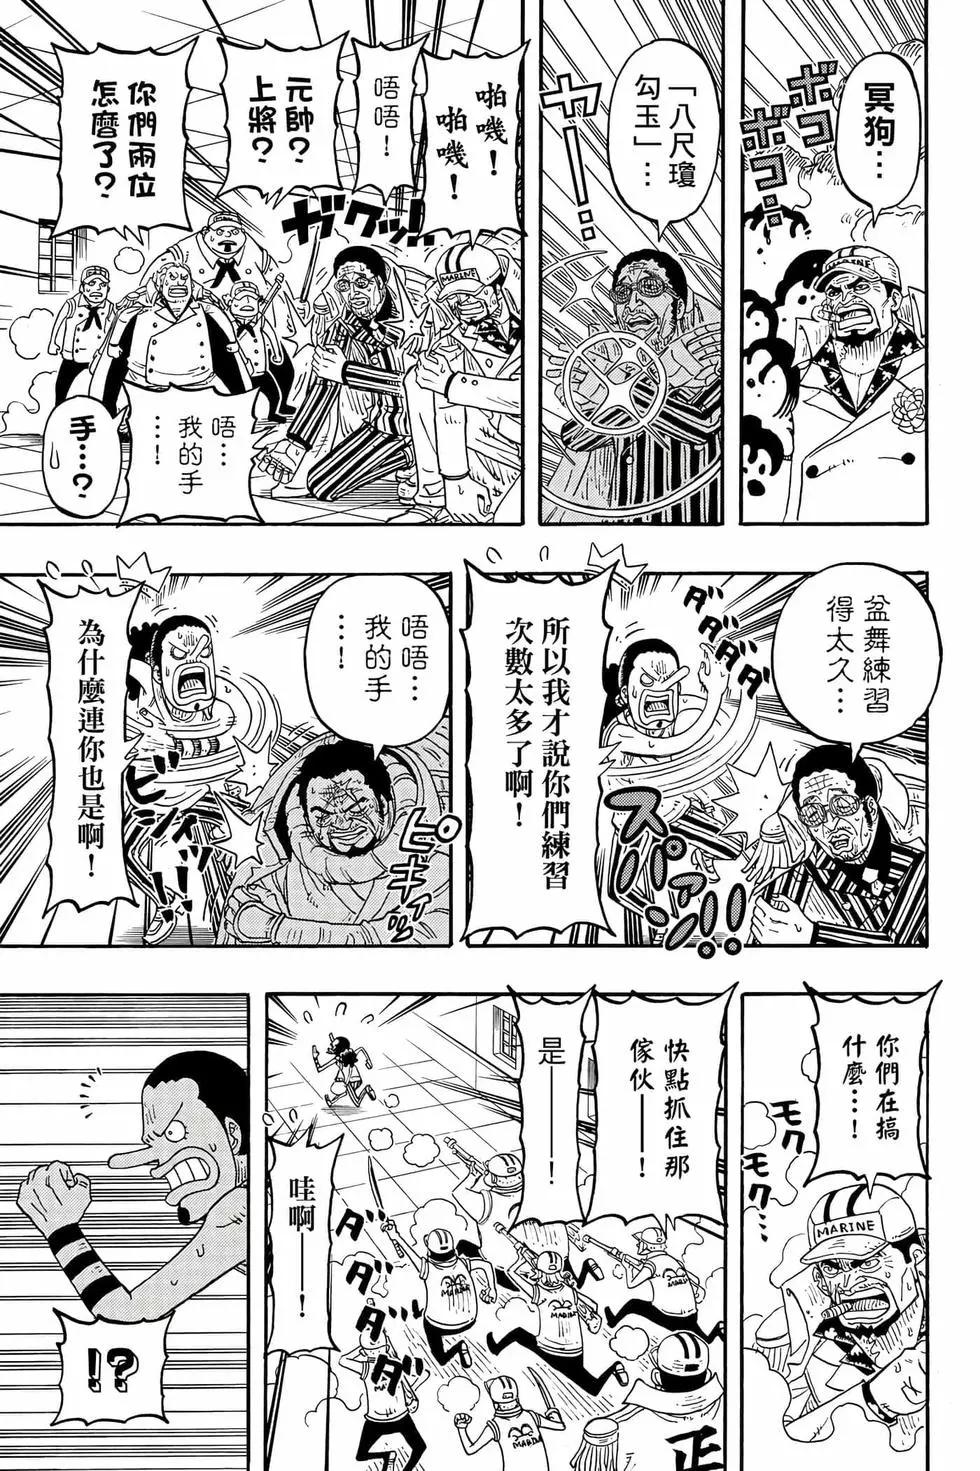 One piece party - 第04卷(1/4) - 2